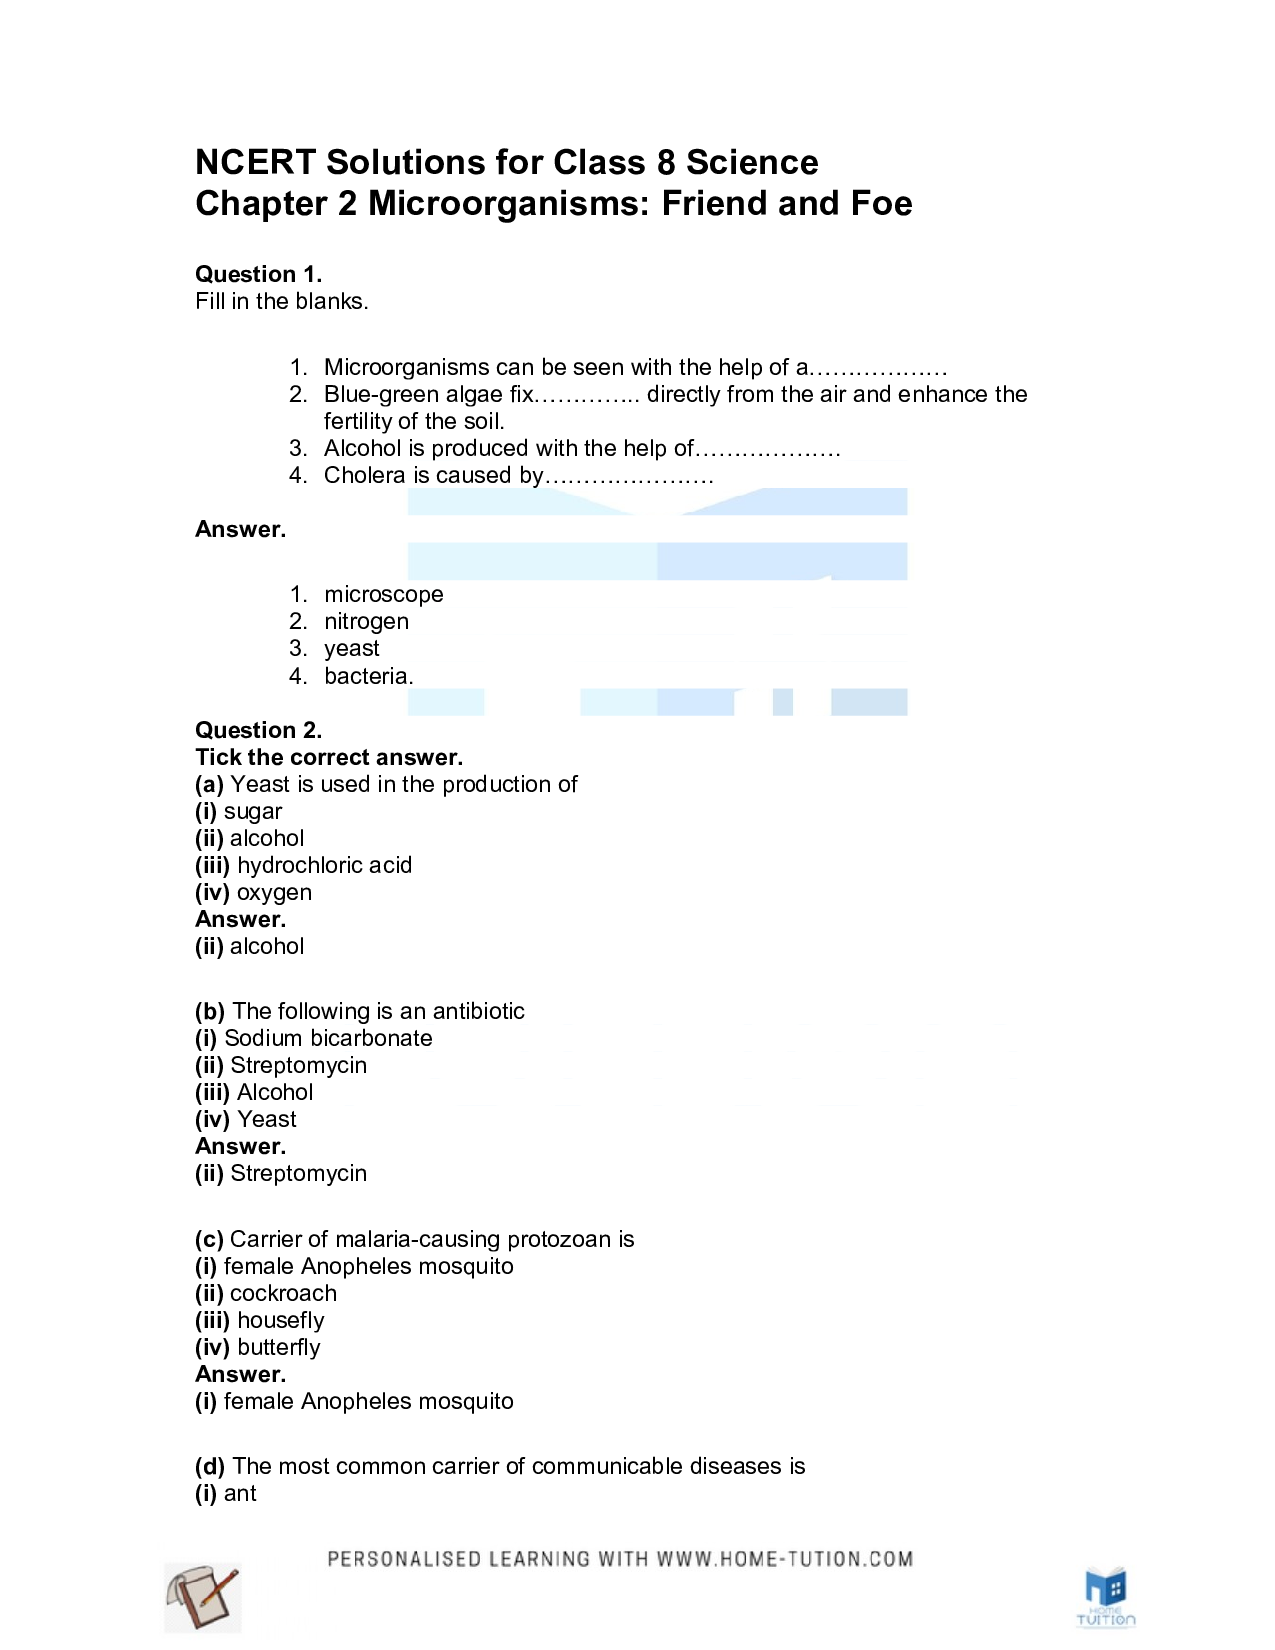 Class 8 Science Chapter 2 Microorganisms: Friend and Foe